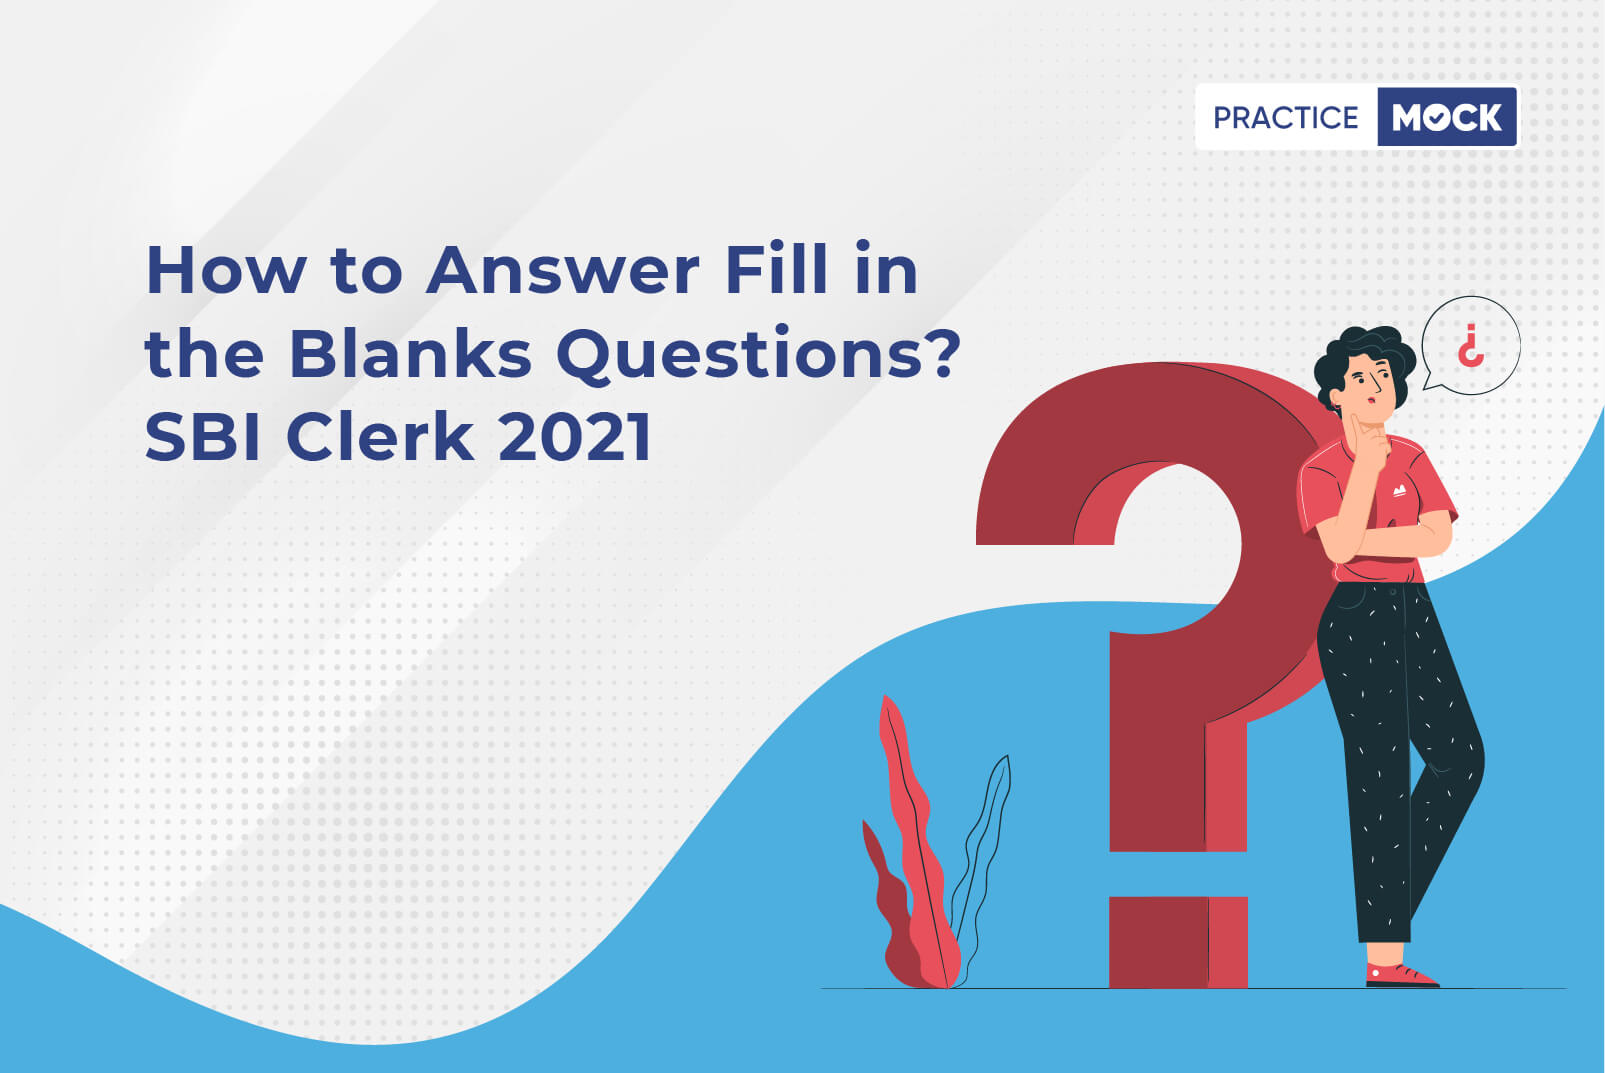 How to Answer Fill in the Blanks Questions-SBI Clerk 2021